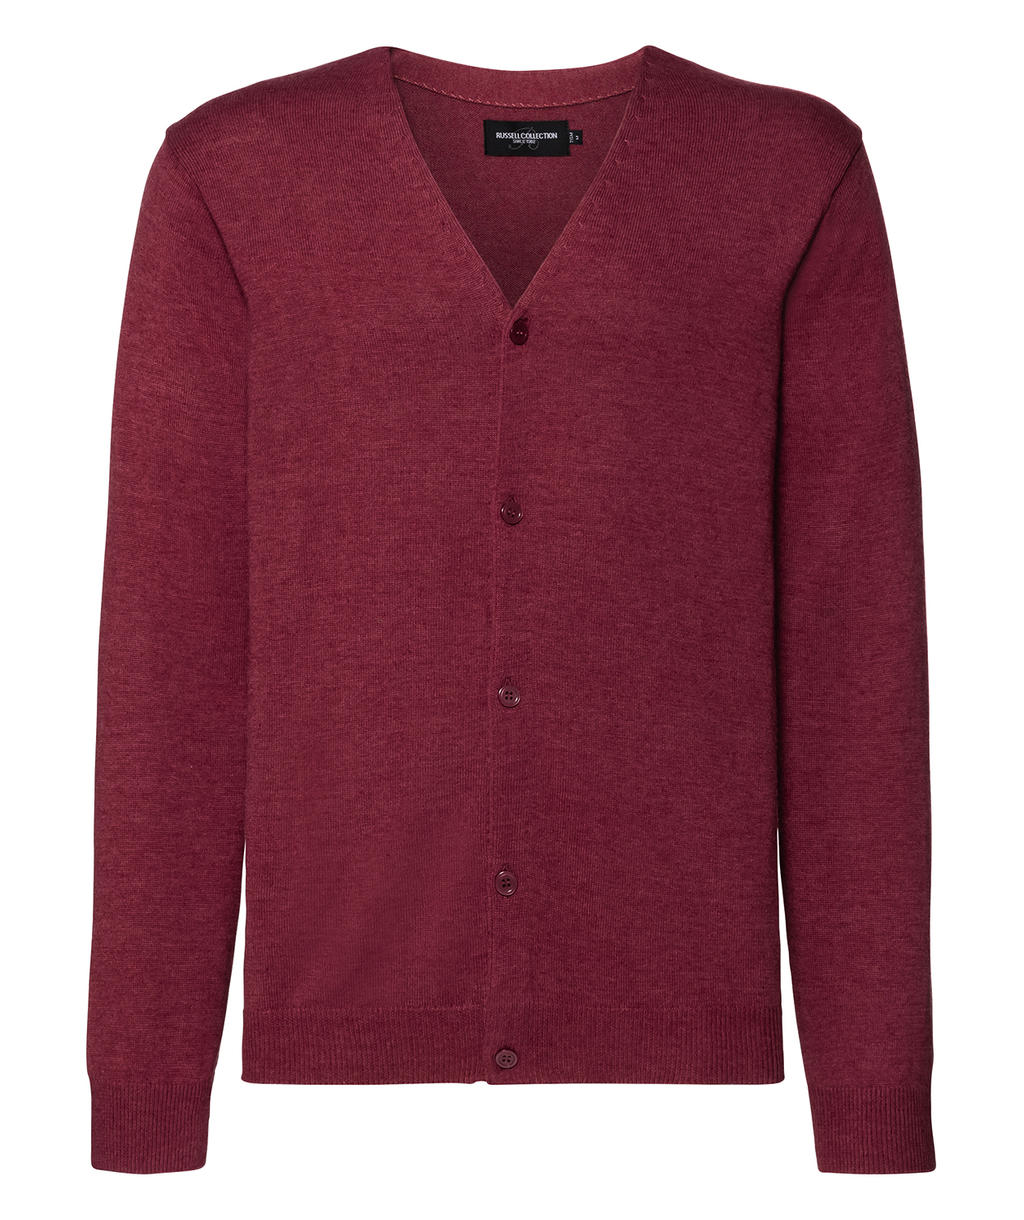  Mens V-Neck Knitted Cardigan in Farbe Cranberry Marl